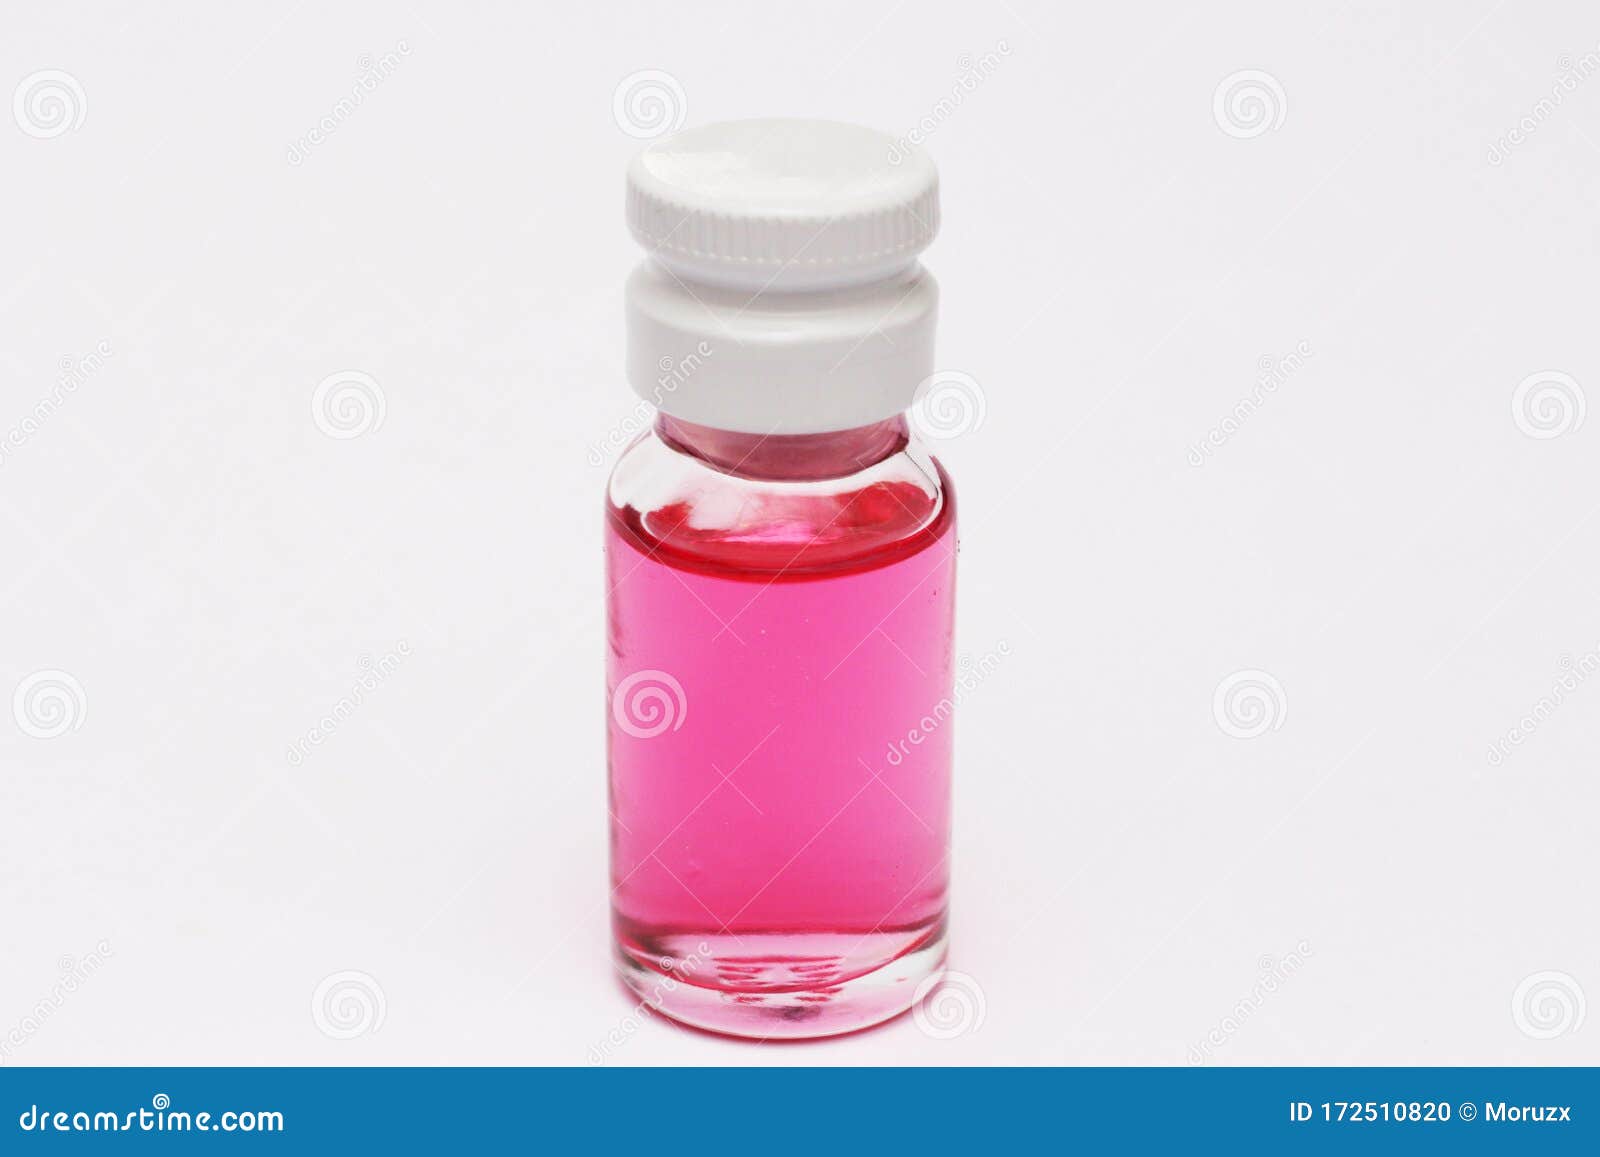 small bottle with red liquid inside. red colored fluid.